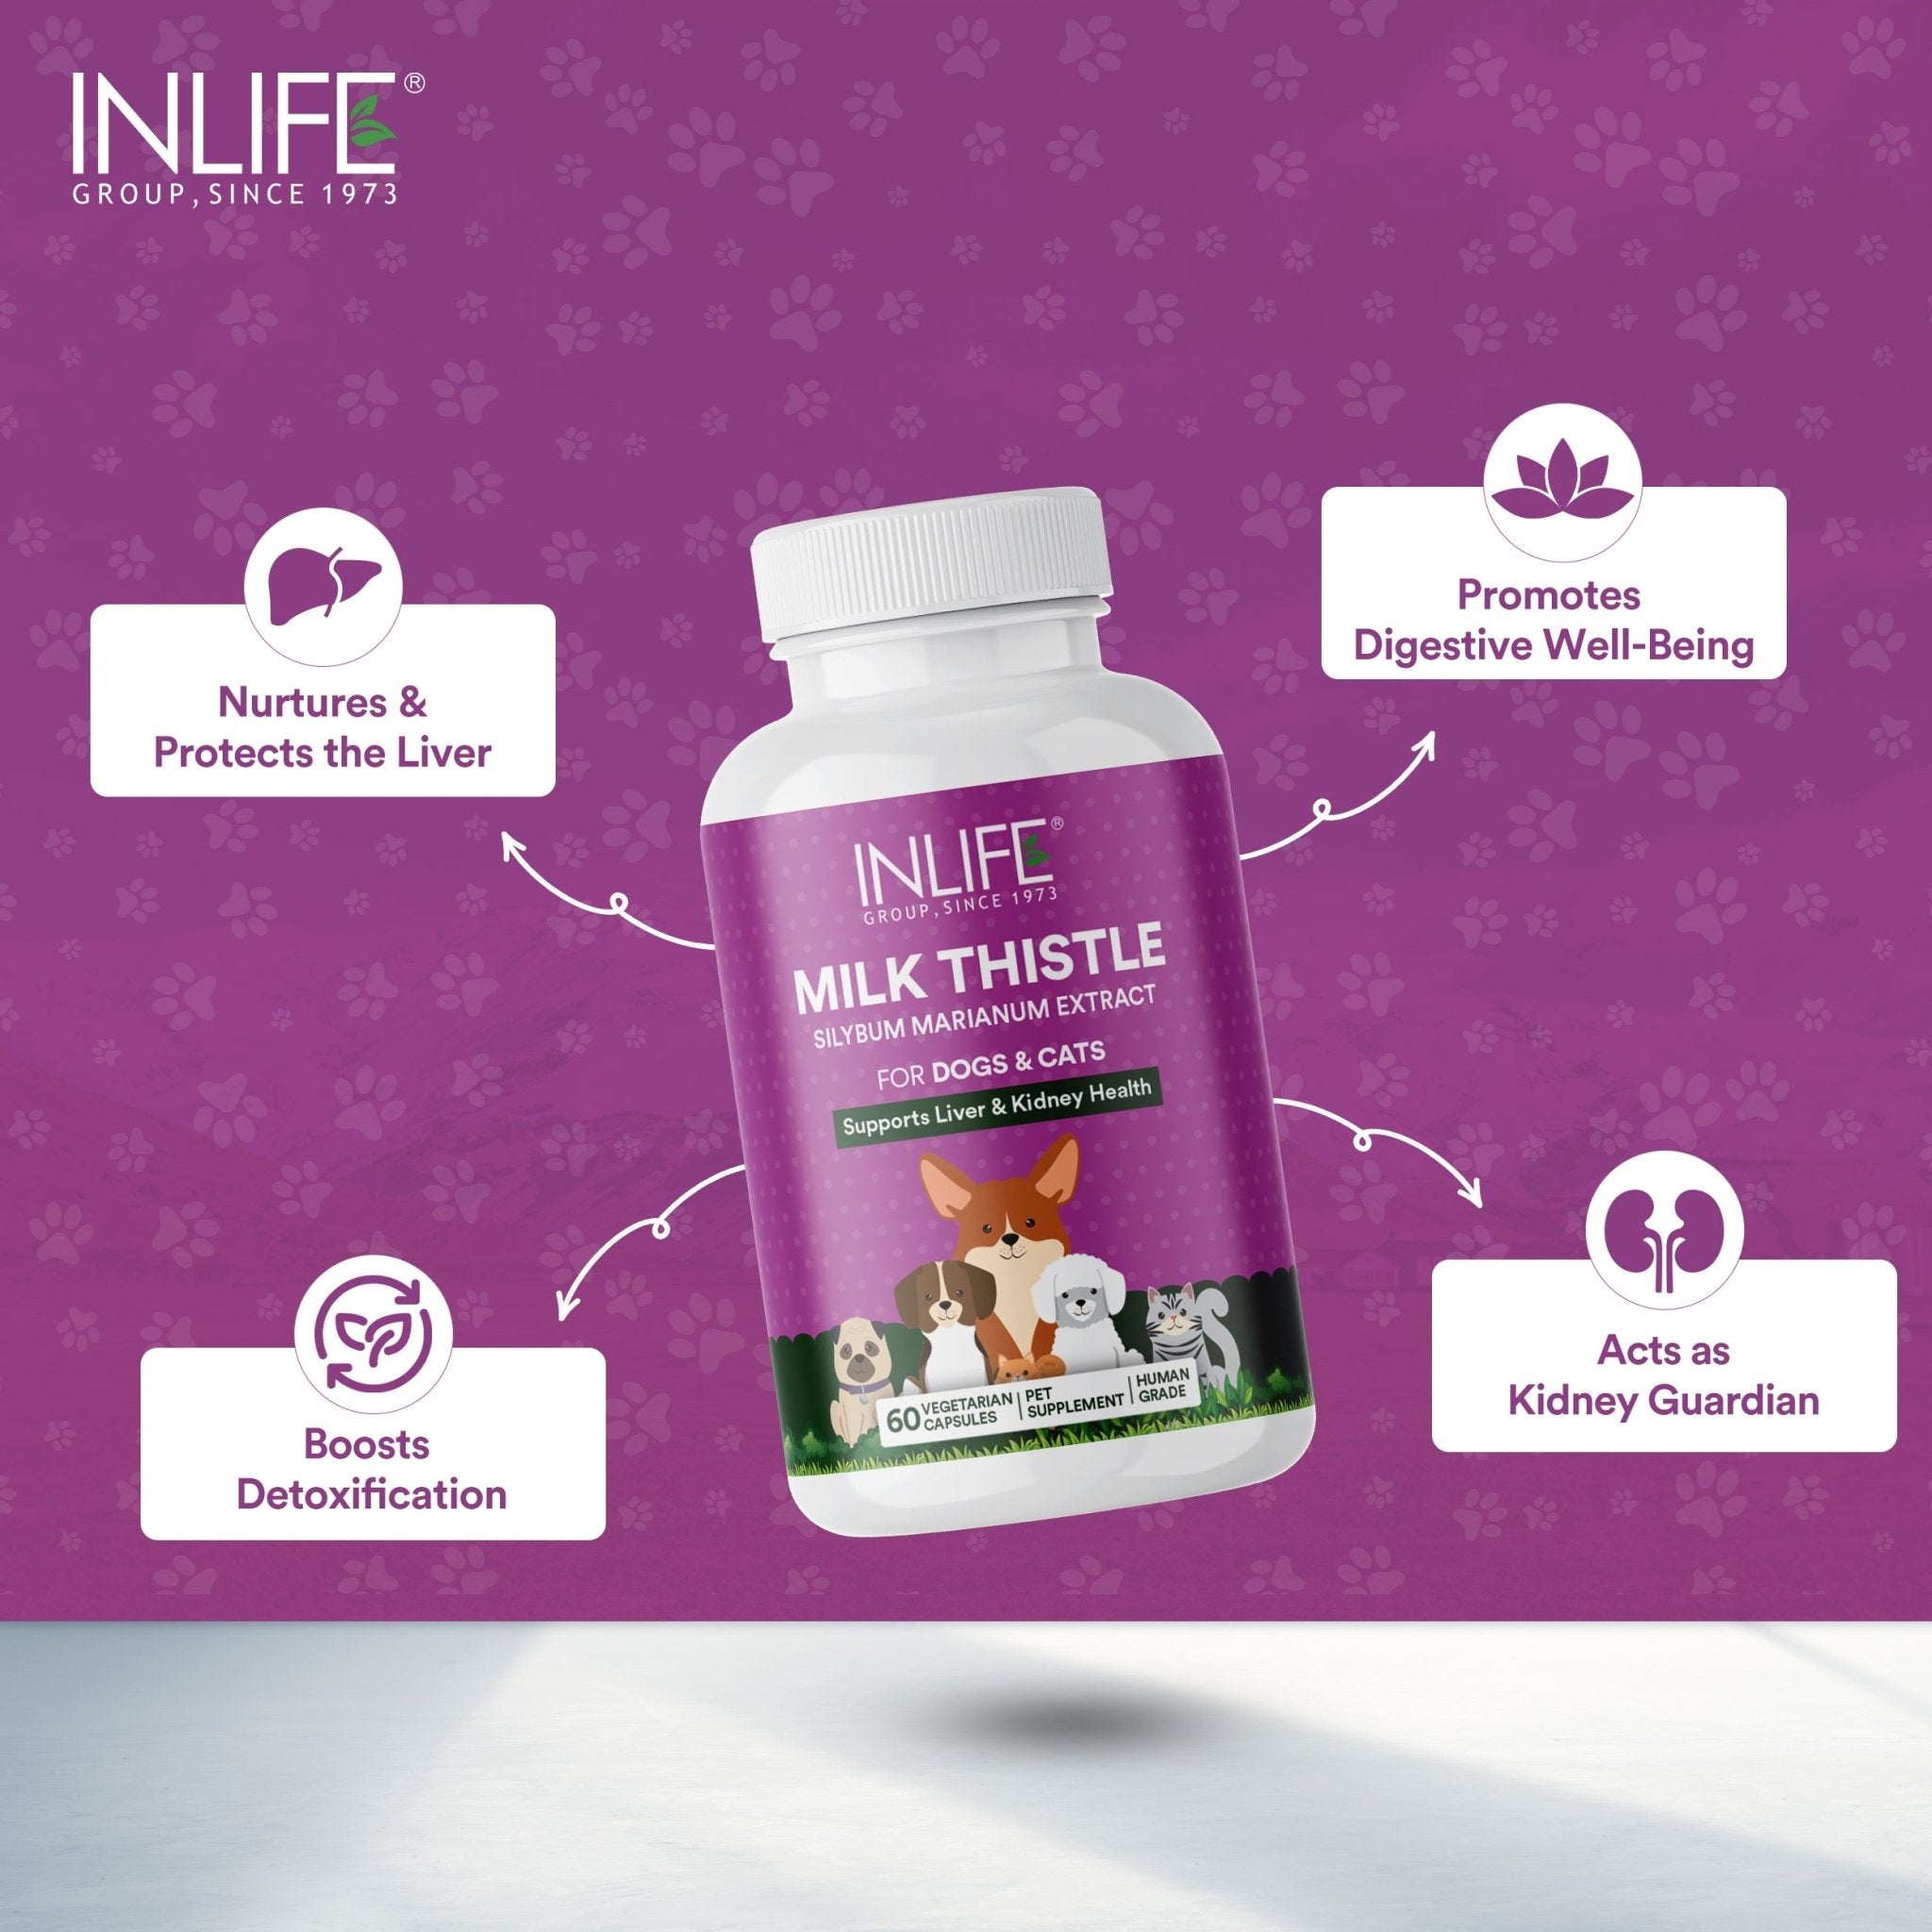 INLIFE Milk Thistle Capsules for Dogs & Cats | Liver Detox Supplement & Kidney Health, 400mg - 60 Vegetarian Capsules - Inlife Pharma Private Limited